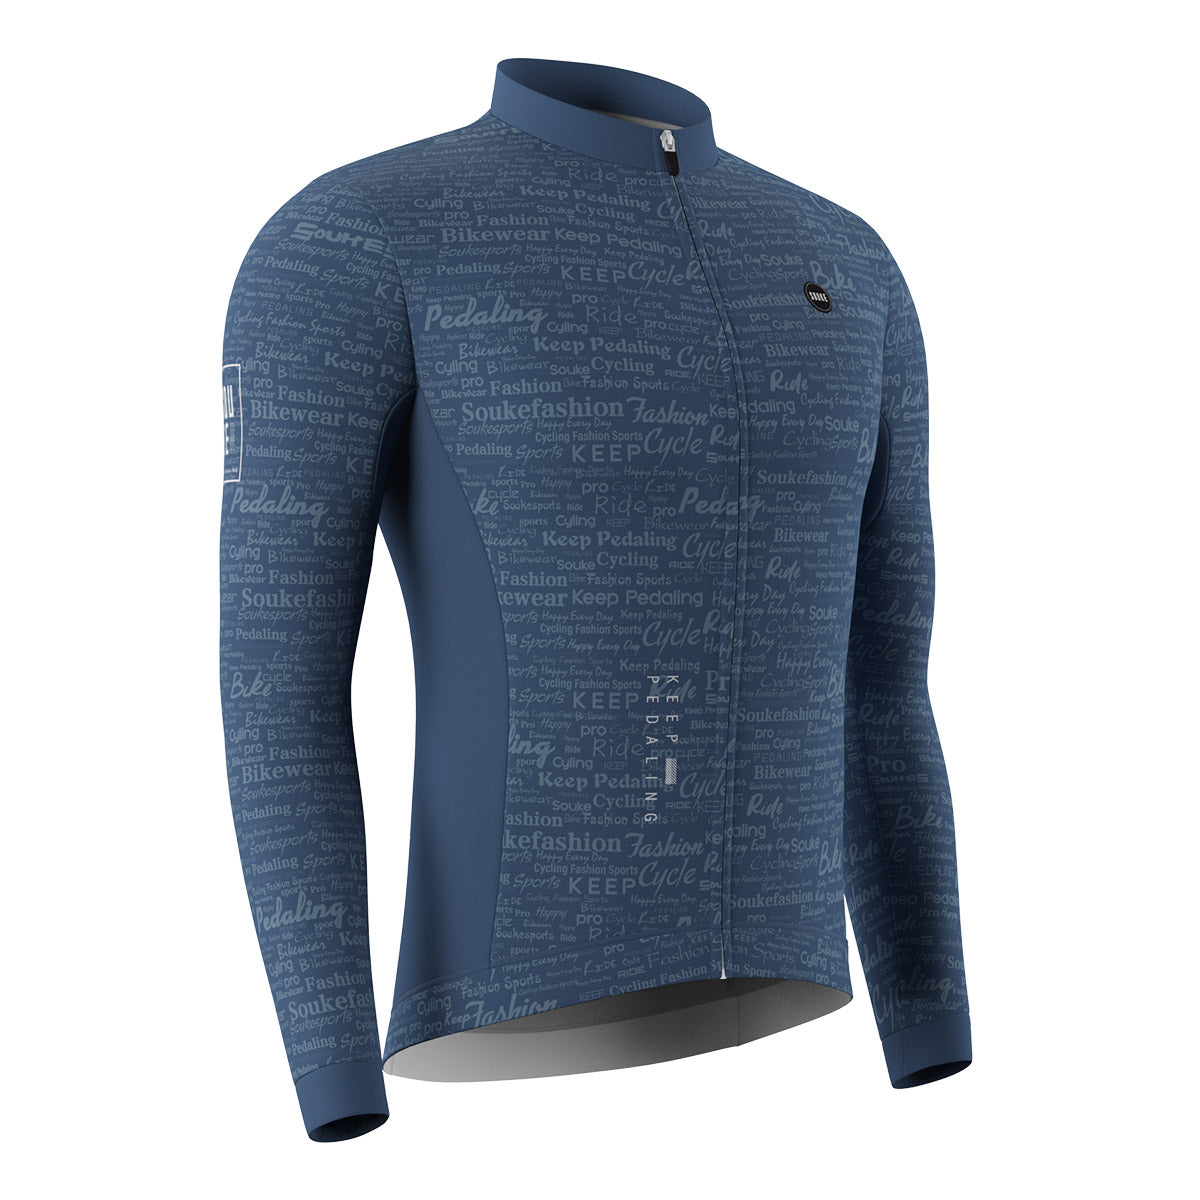 cycling long sleeve jersey, Graphene jersey,jersey for winter,blue long jersey,jersey for winter and autumn, cold weather jersey (6793683566705)